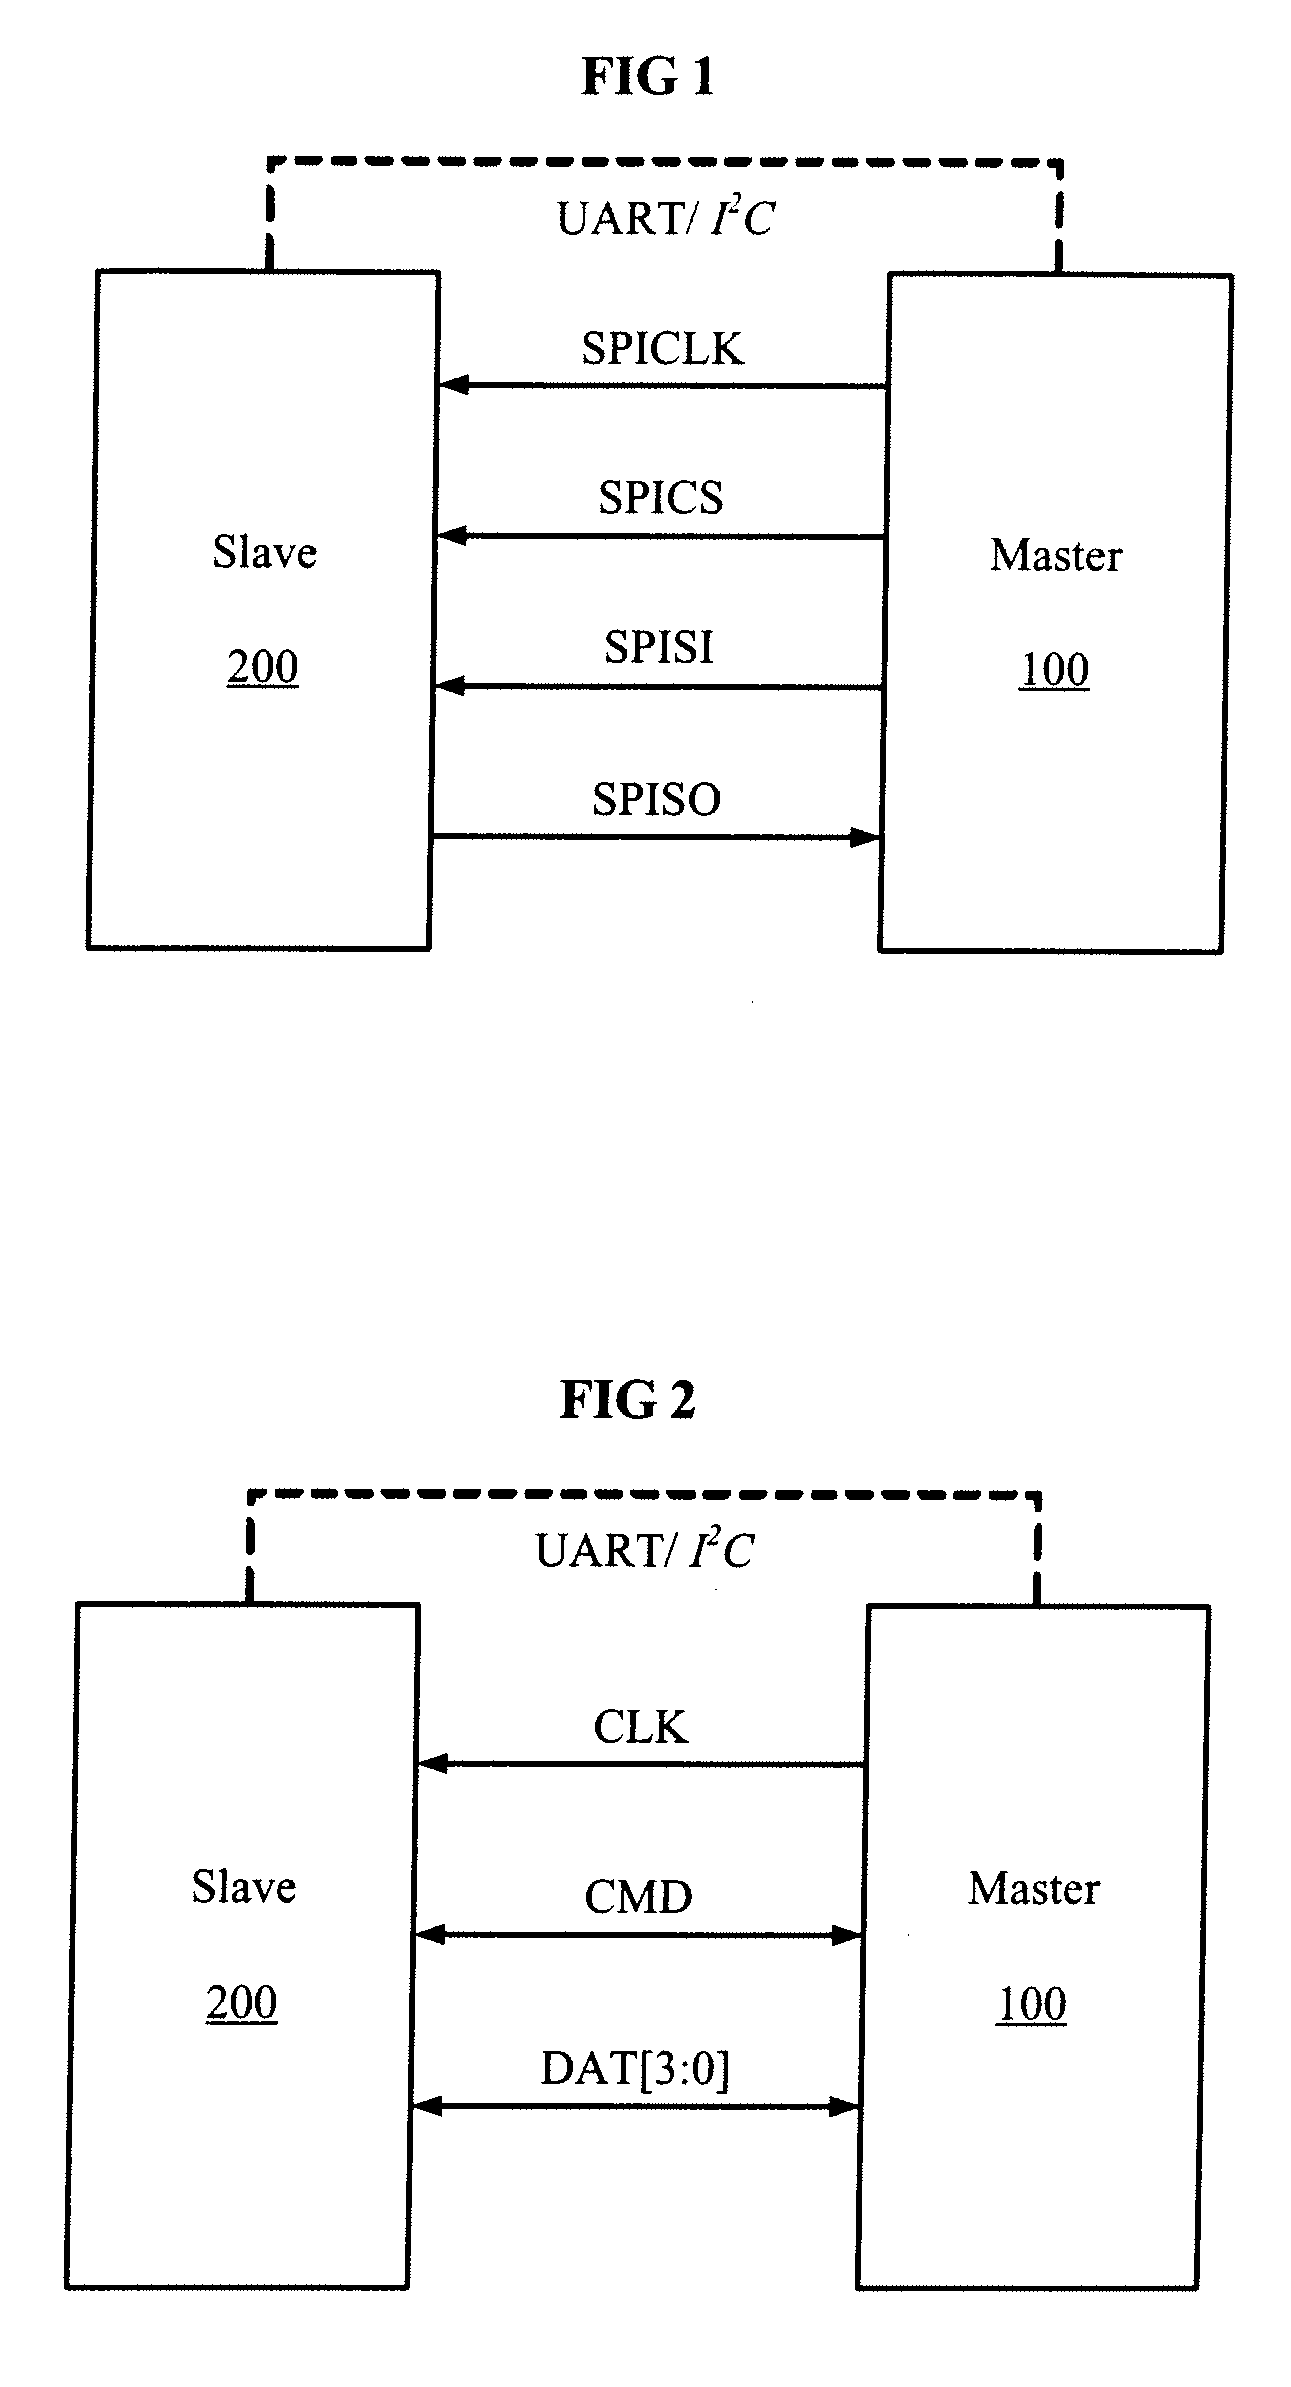 Peripheral Interface, Receiving Apparatus and Data Communication Method Using the Same